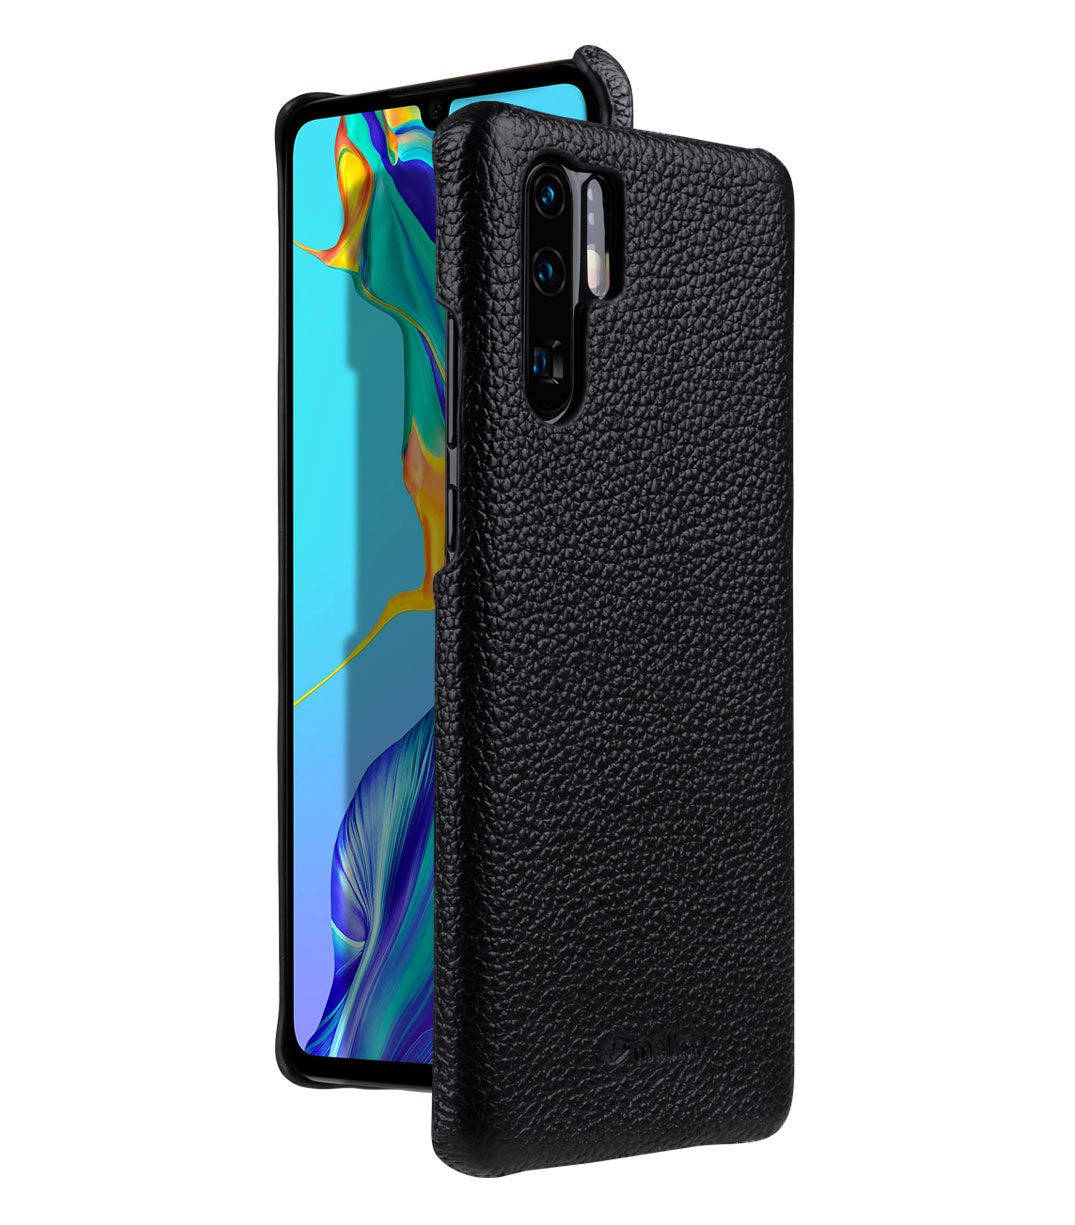 Premium Leather Snap Cover Case for Huawei P30 Pro